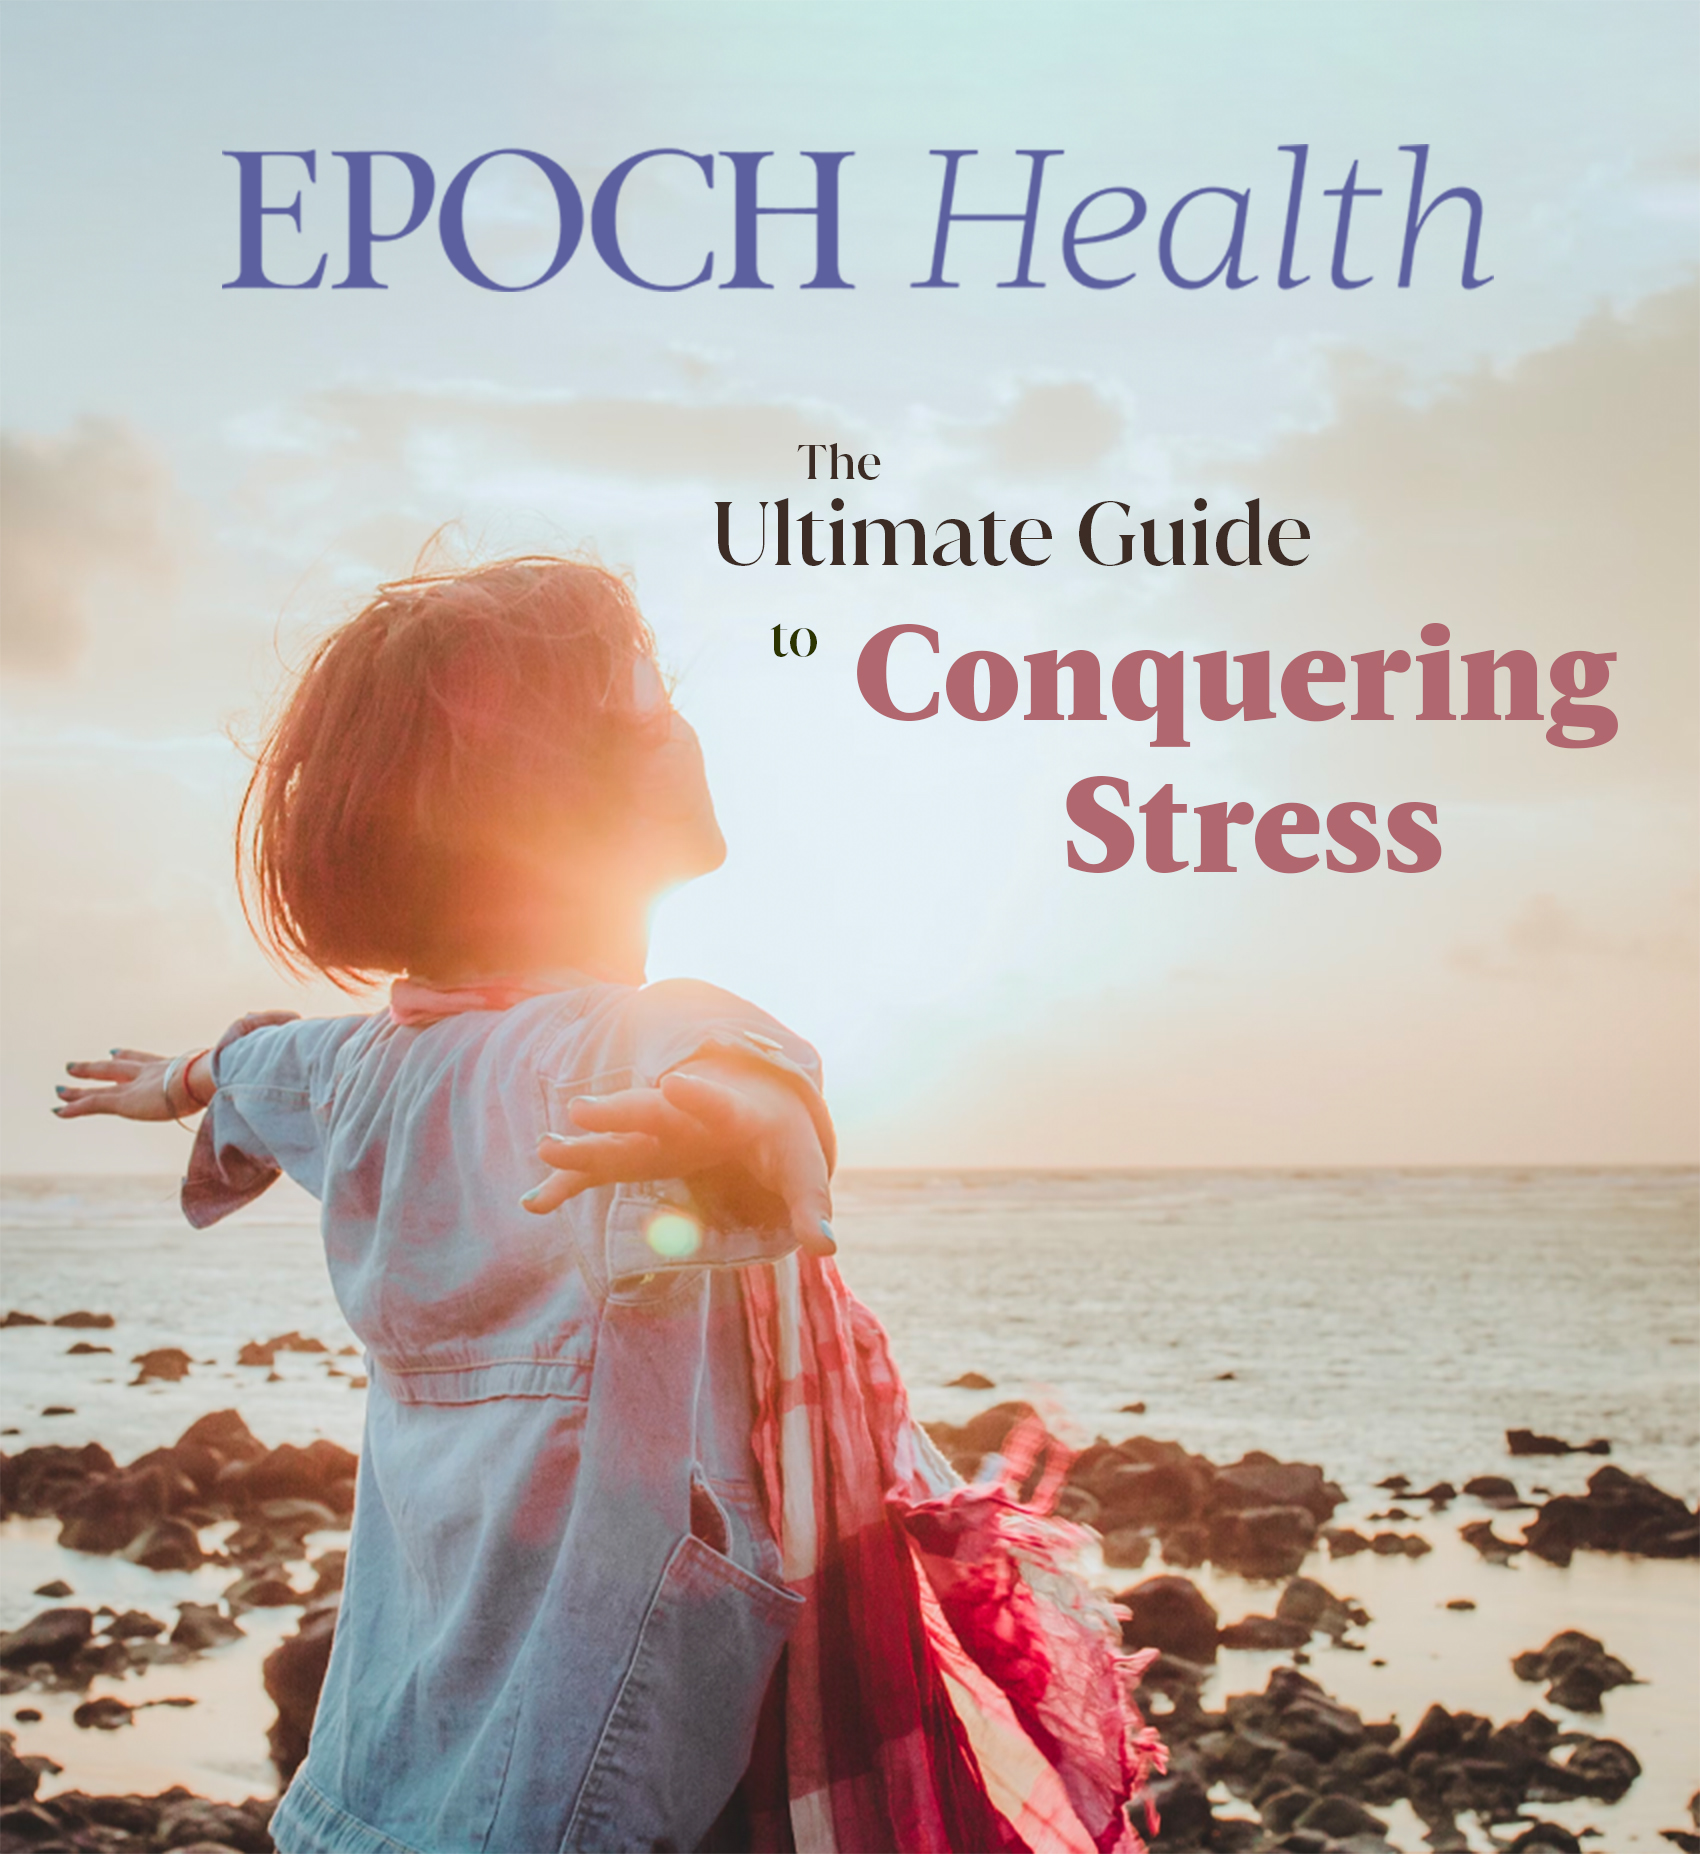 The Ultimate Guide to Conquering Stress